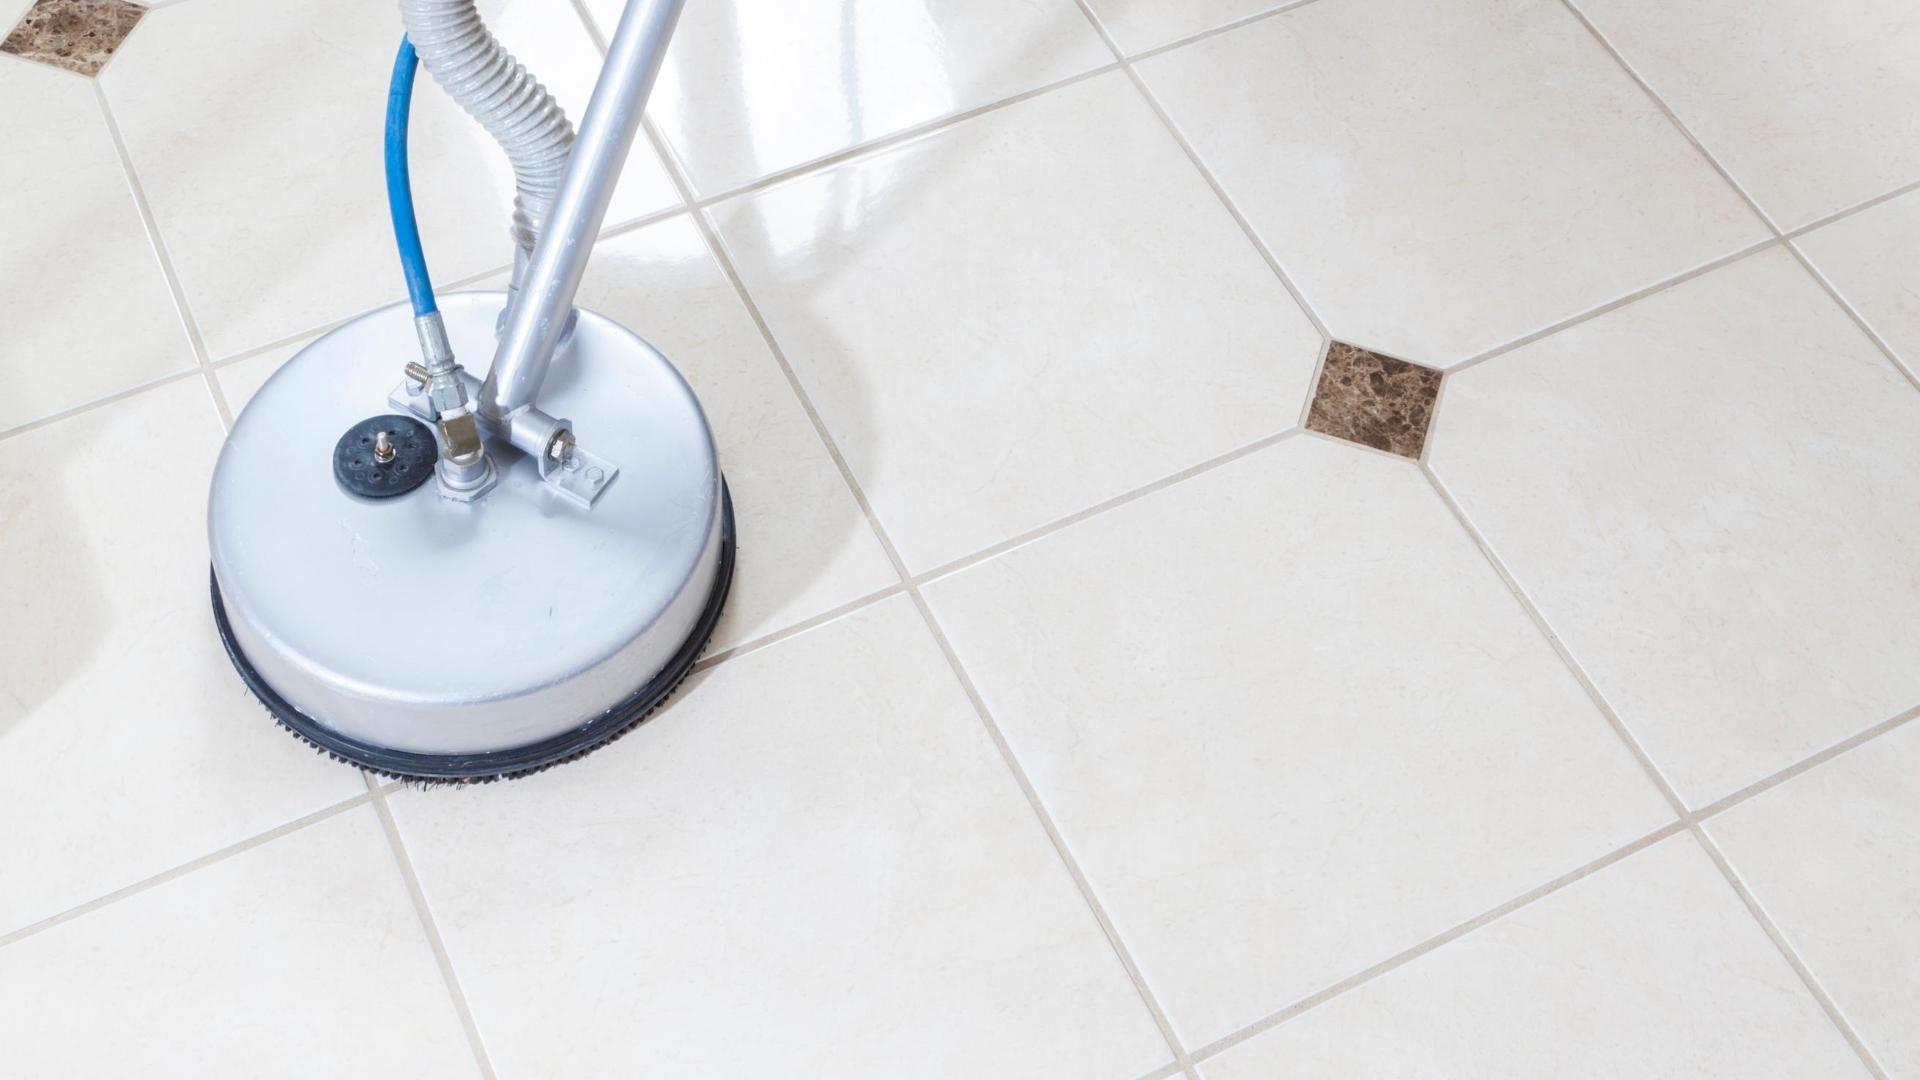 https://sparklean.co/storage/2020/08/tile-and-grout-cleaning-service-2.jpg